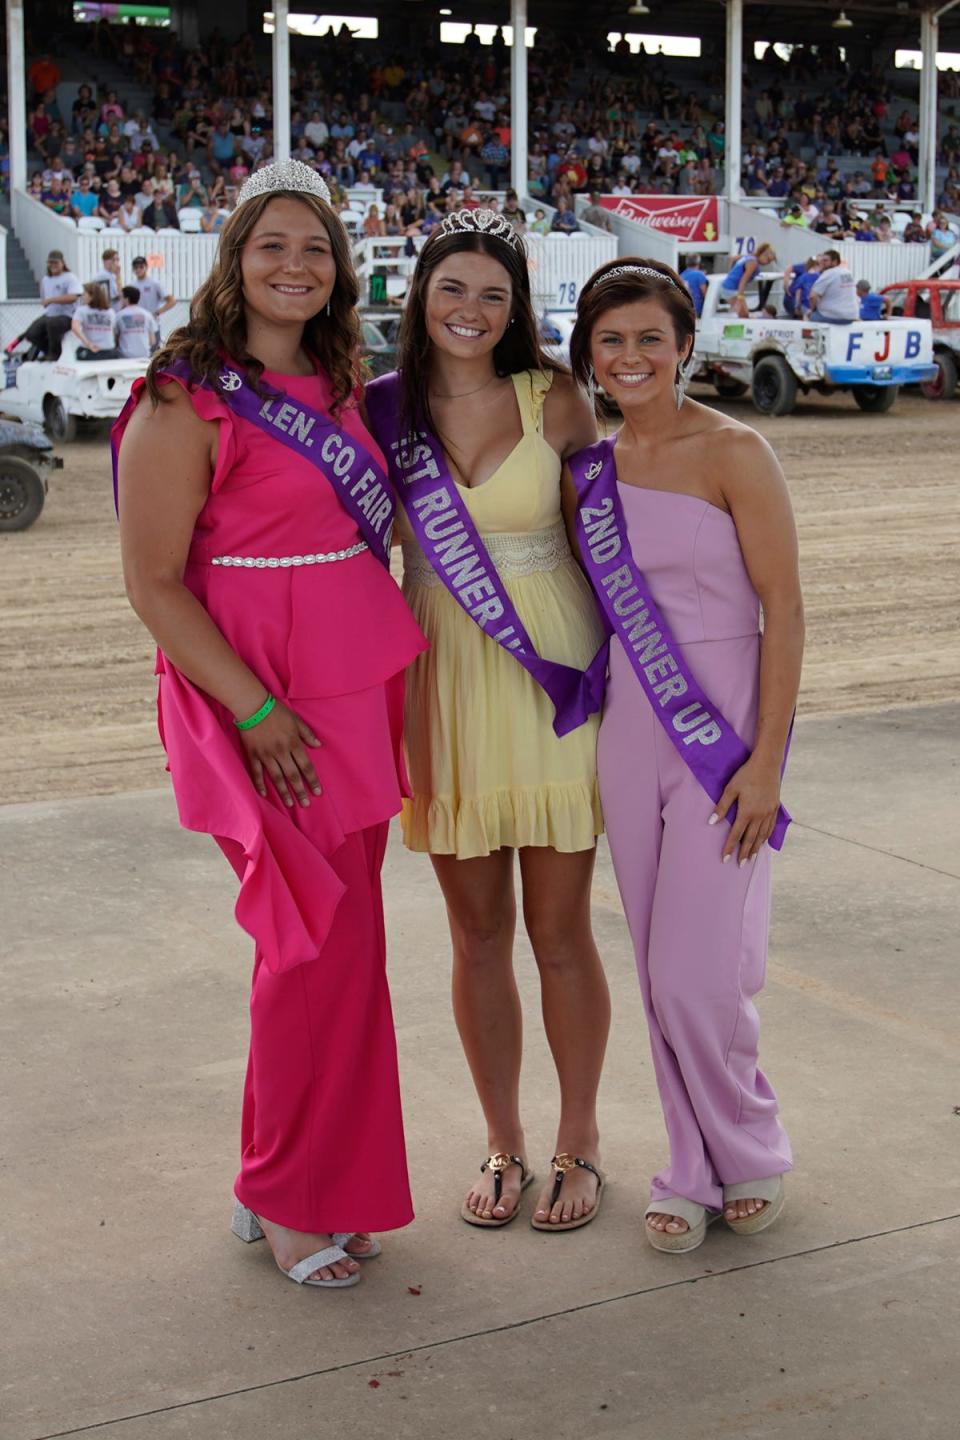 2022 Lenawee County Fair Queen Kindell Covey, left, is pictured with first runner-up Emily Maran, center, and second runner-up Kayleigh Barrett before the figure 8 demolition derby Wednesday at the Lenawee County Fair.